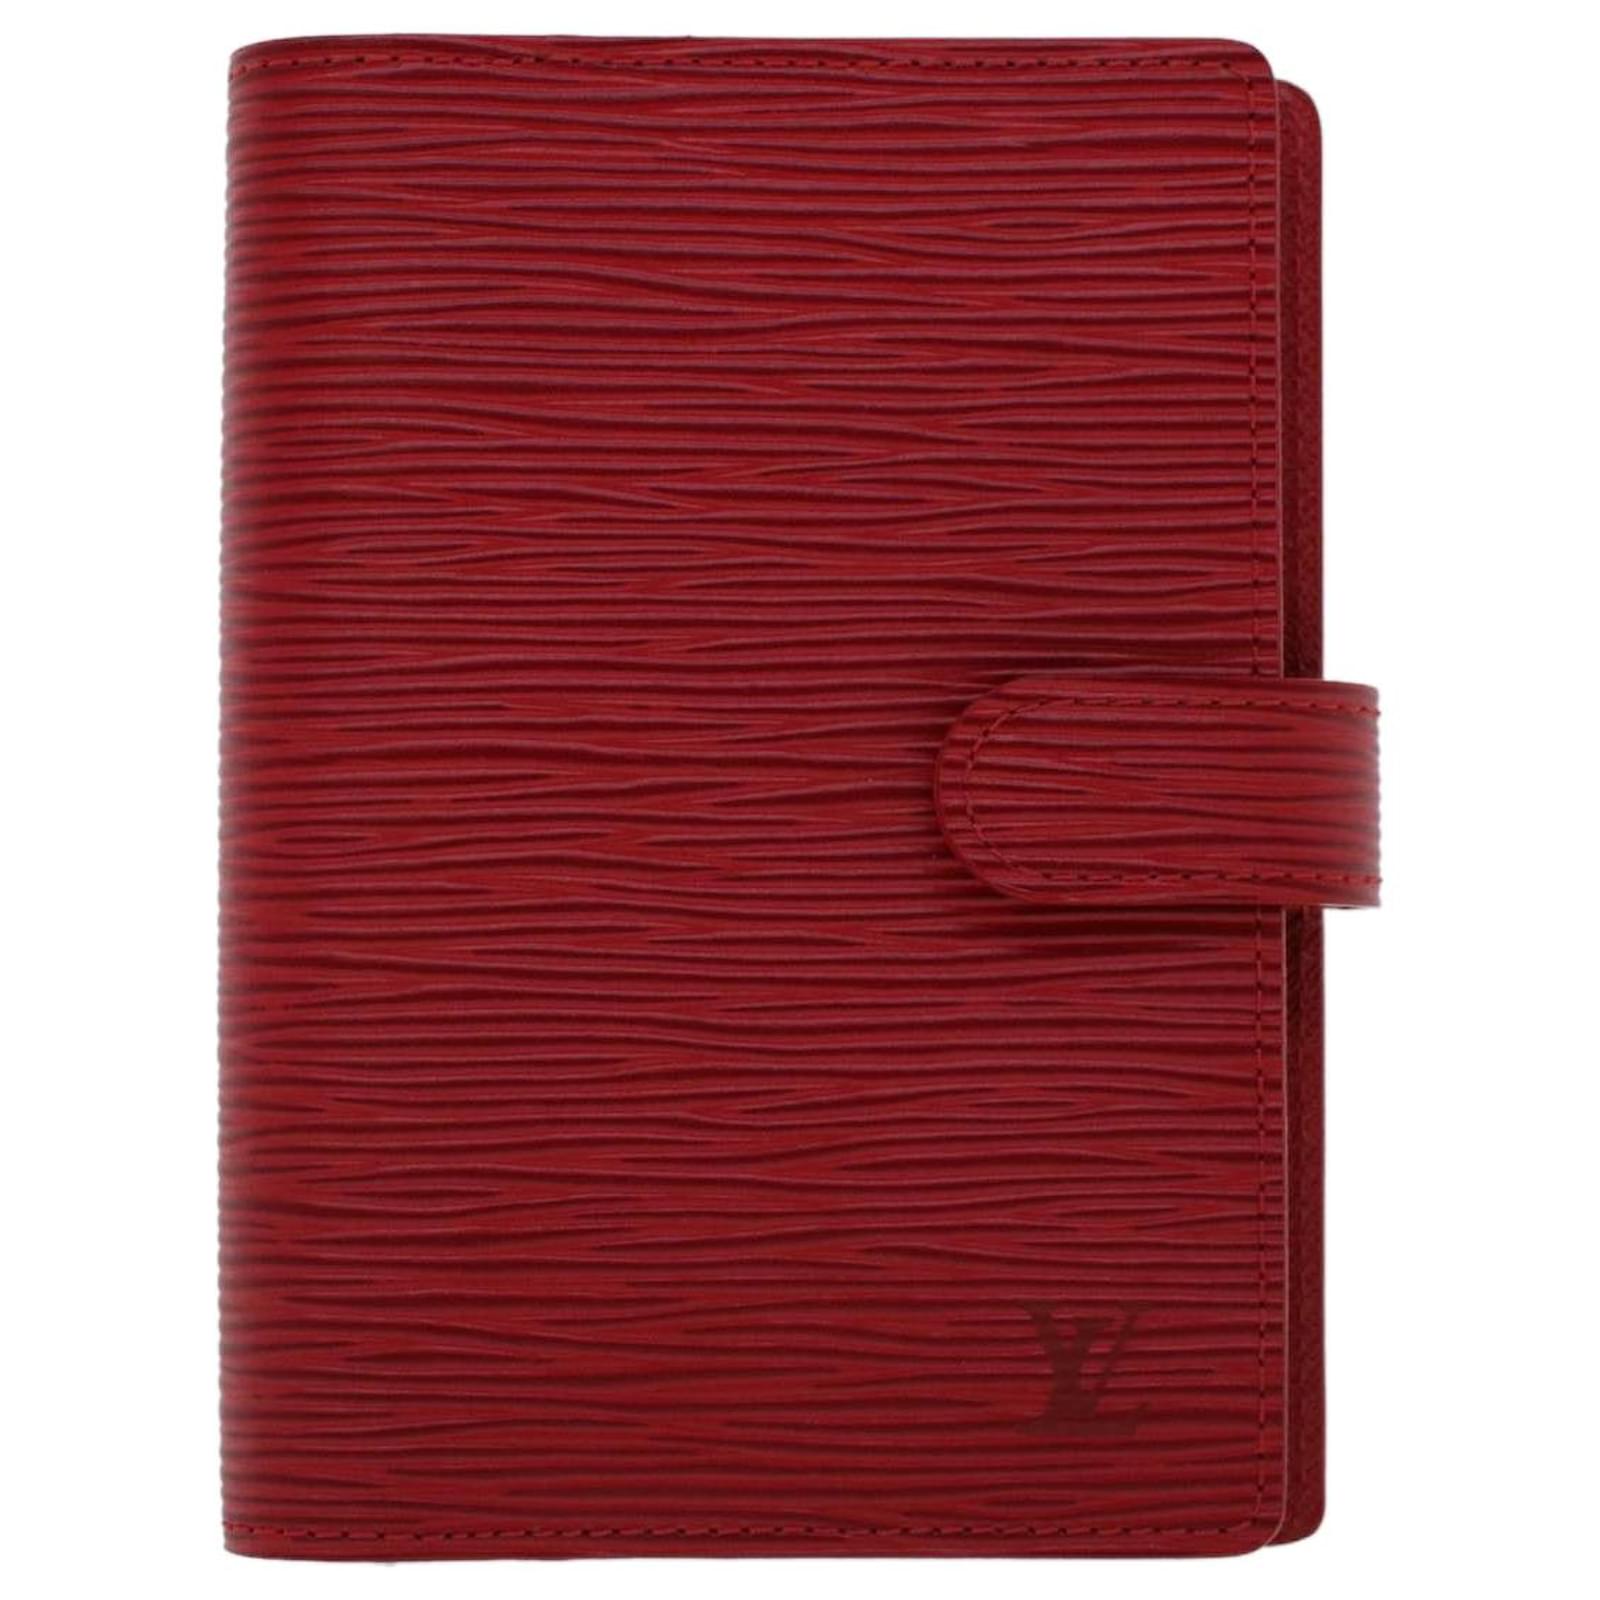 Louis Vuitton Agenda Pm Red Leather Wallet (Pre-Owned)